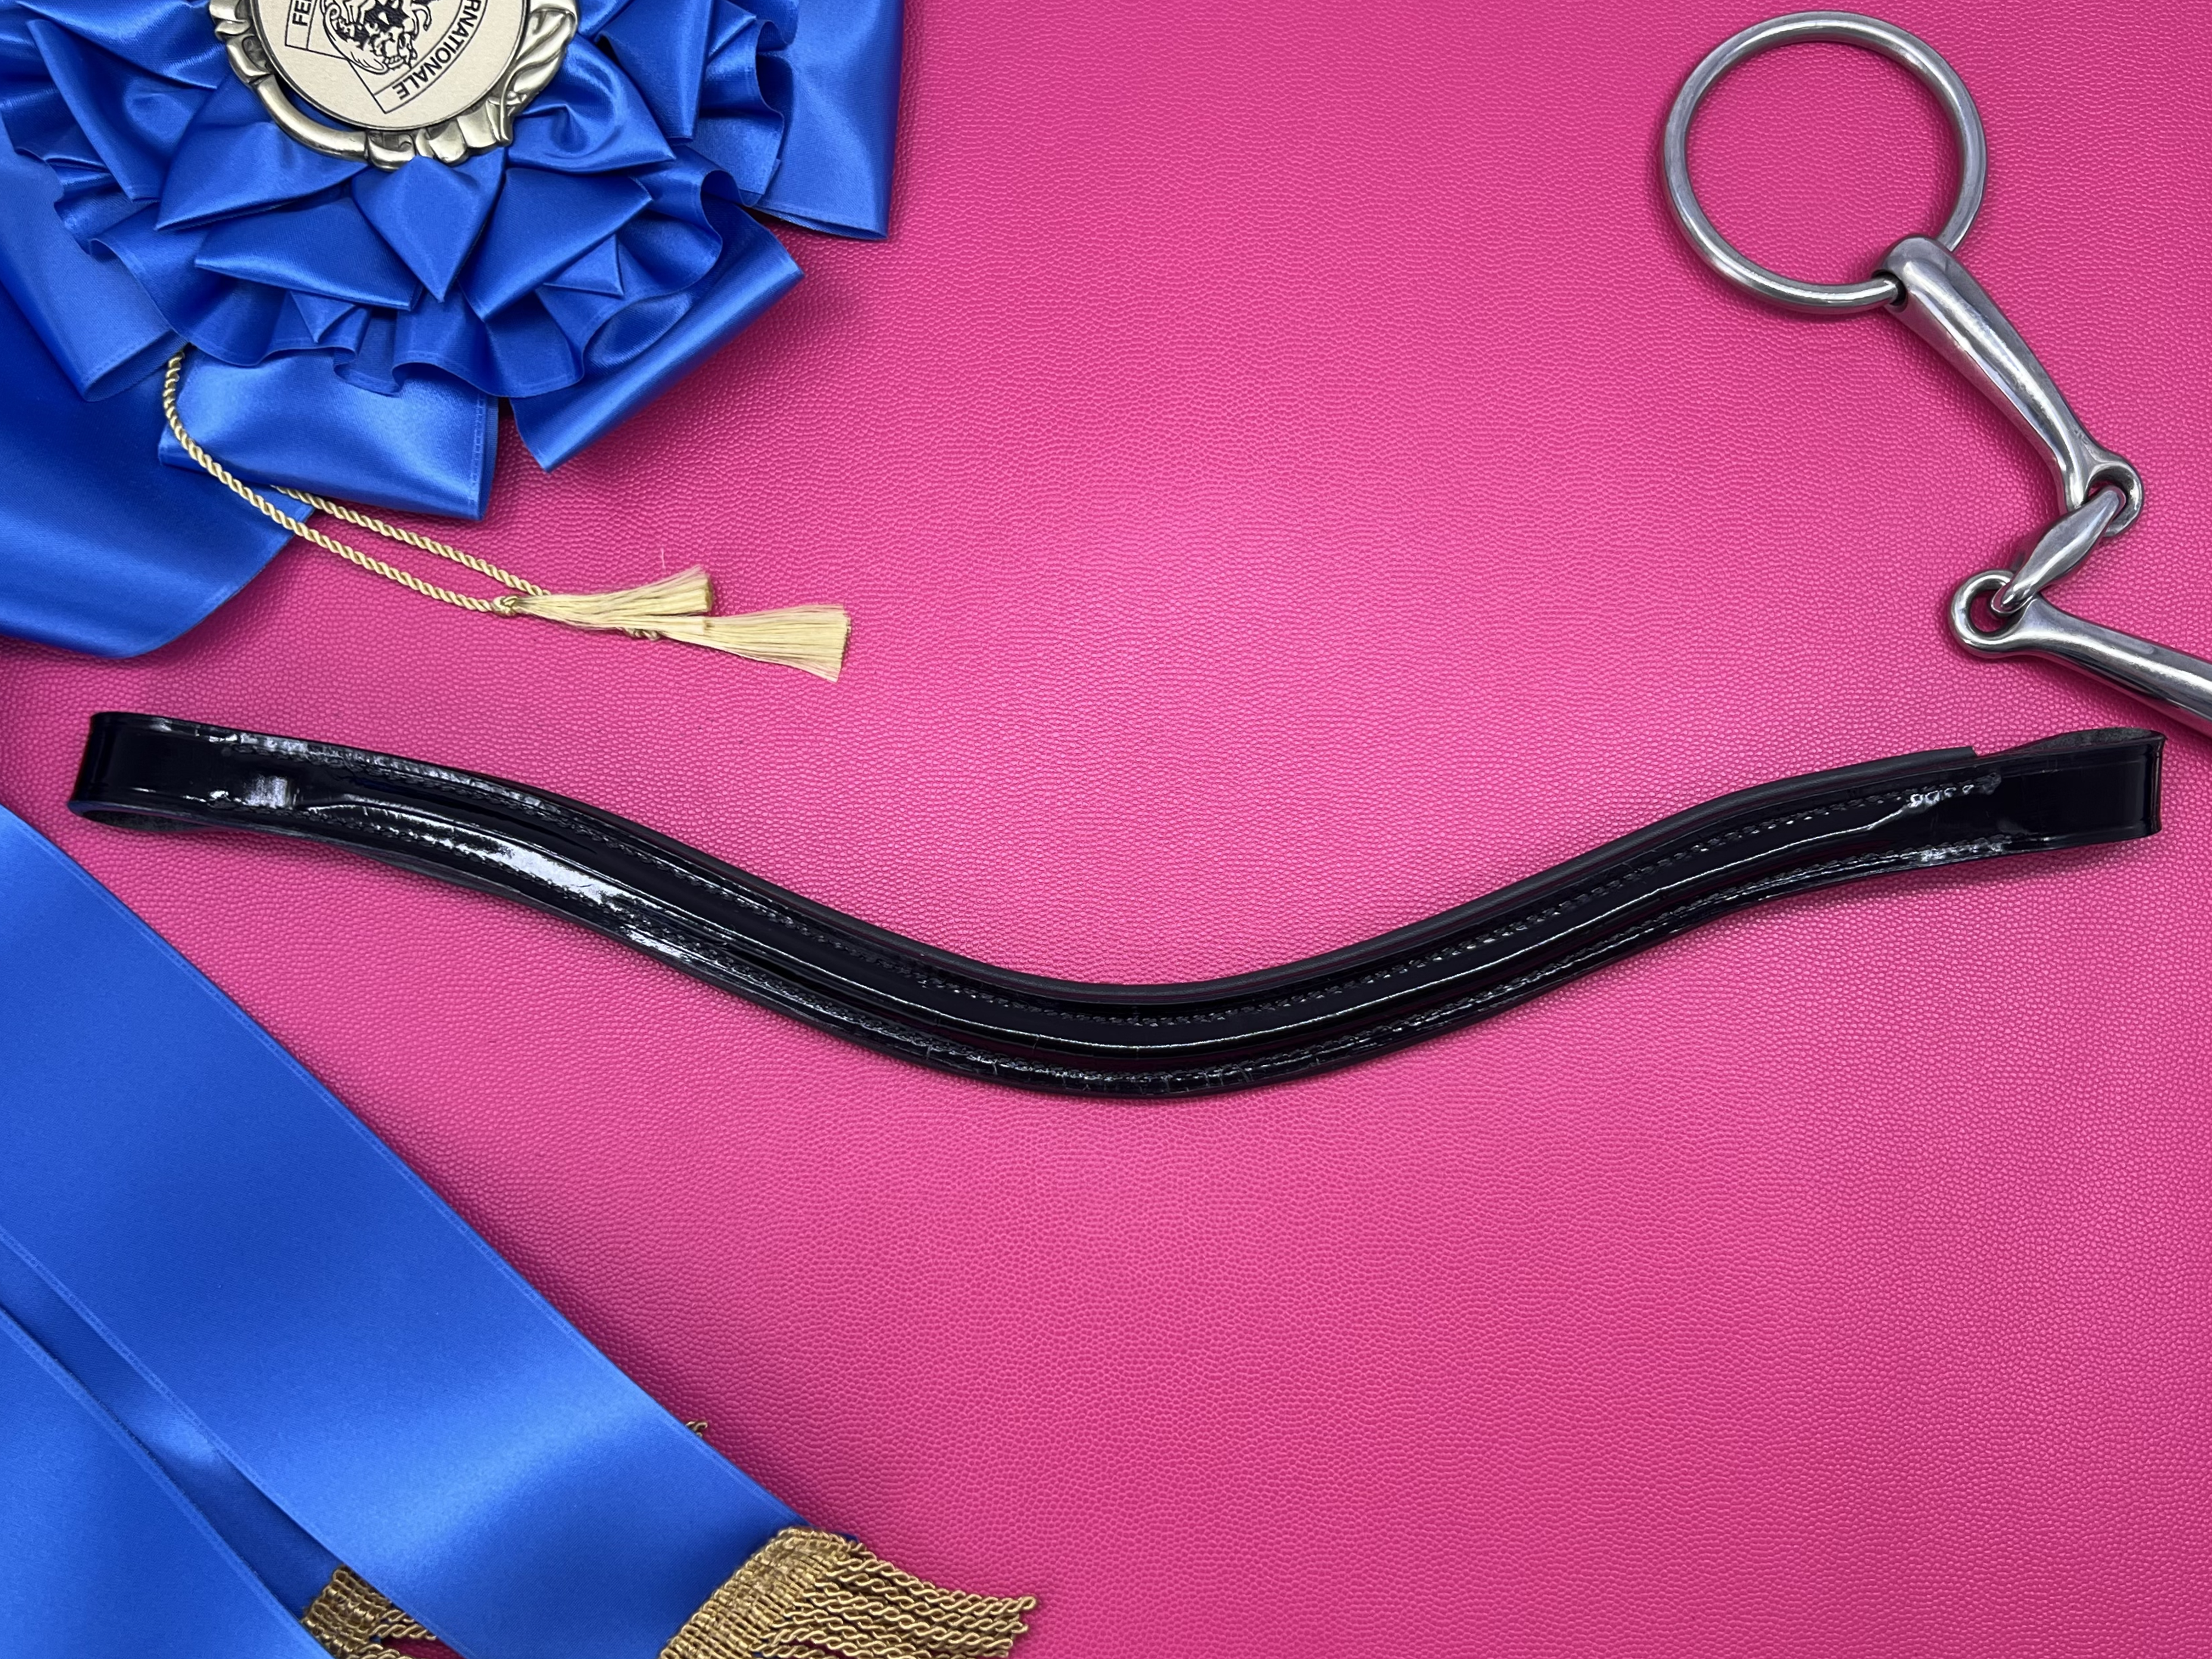 Patent Leather Browbands - All Styles - Empty Channel and Raised